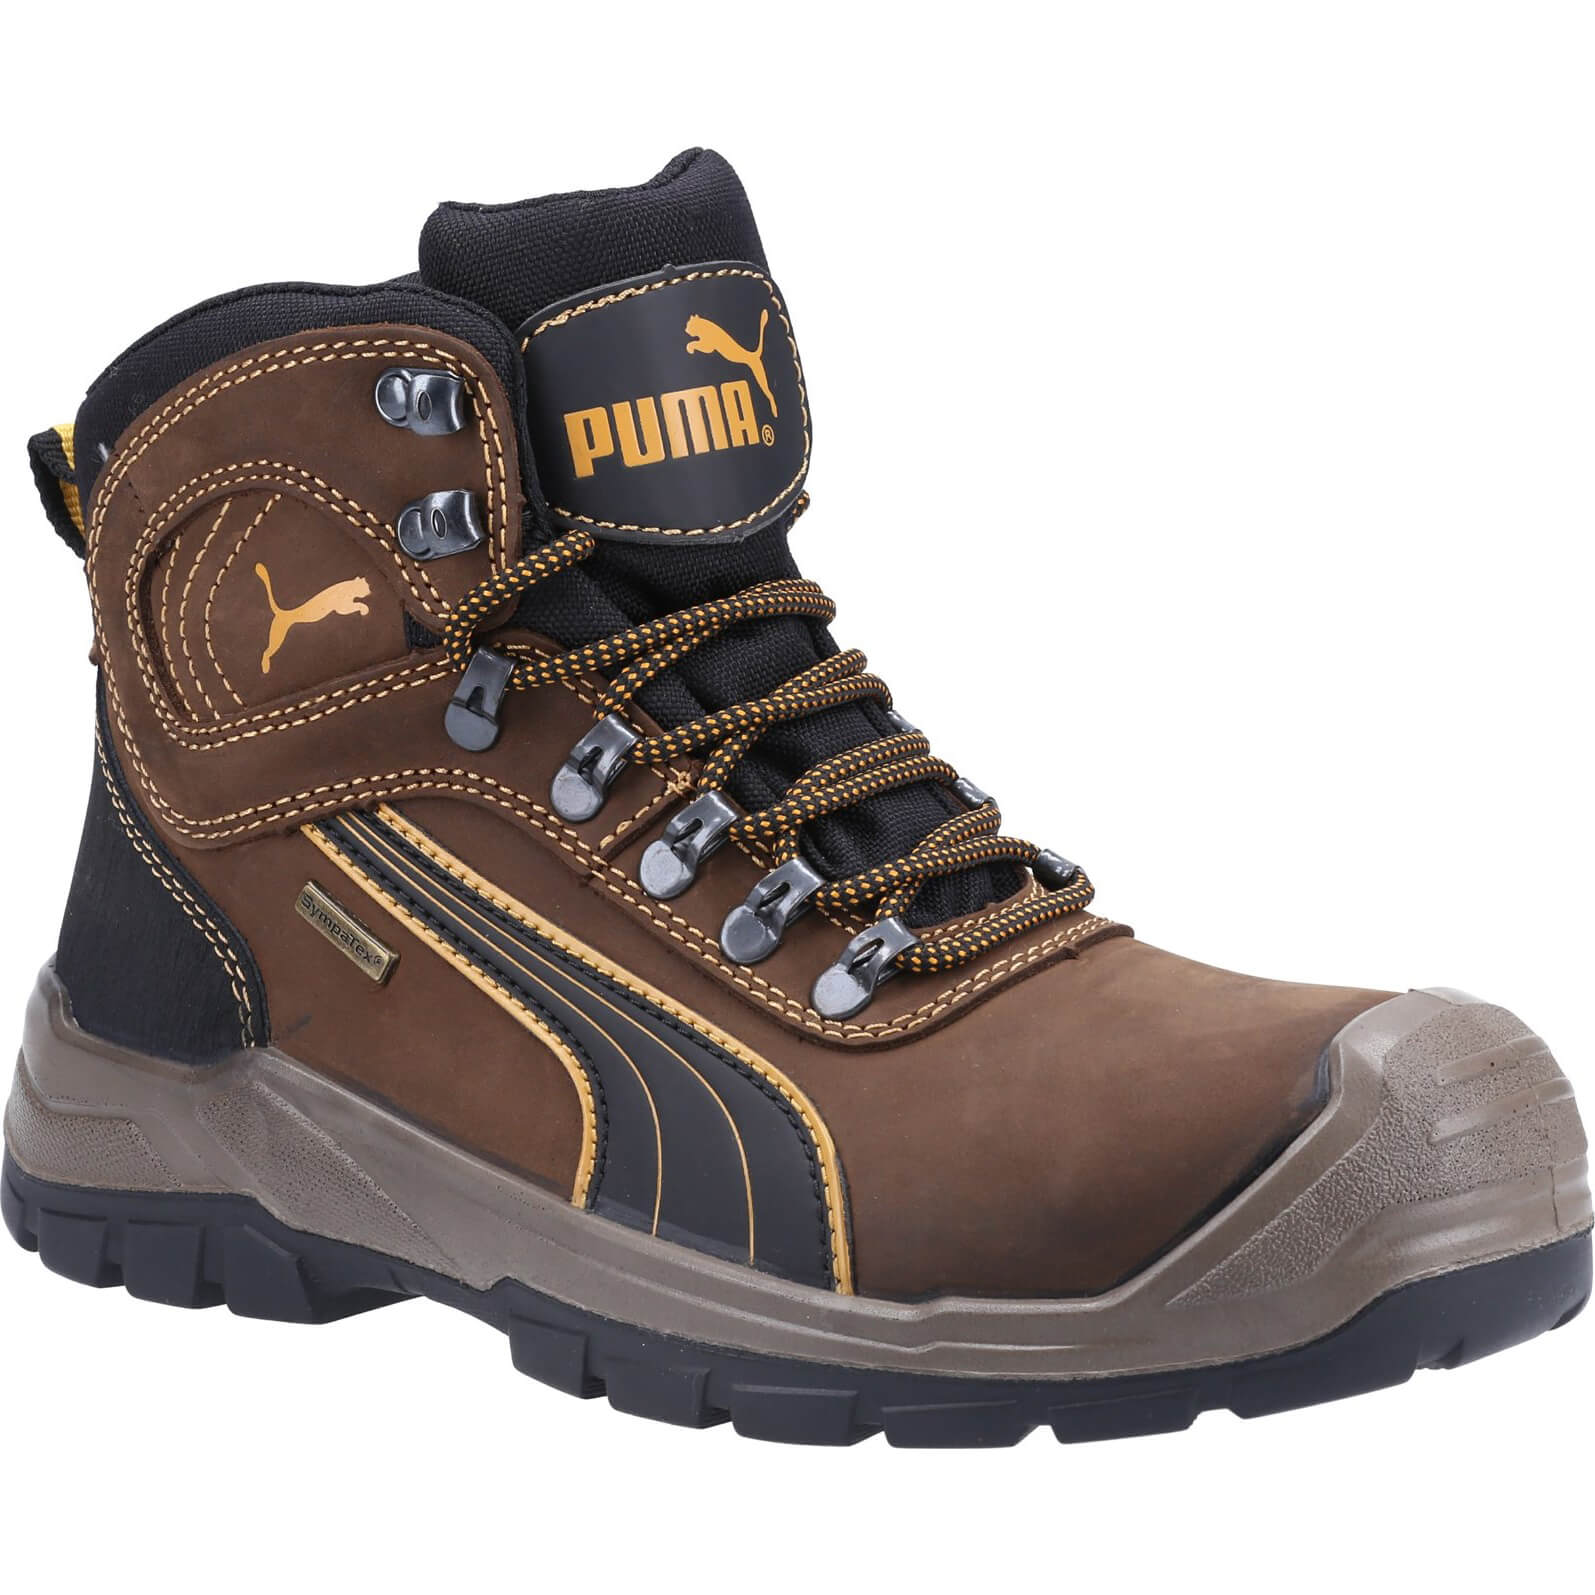 Image of Puma Mens Sierra Nevada Mid Safety Boots Brown Size 12